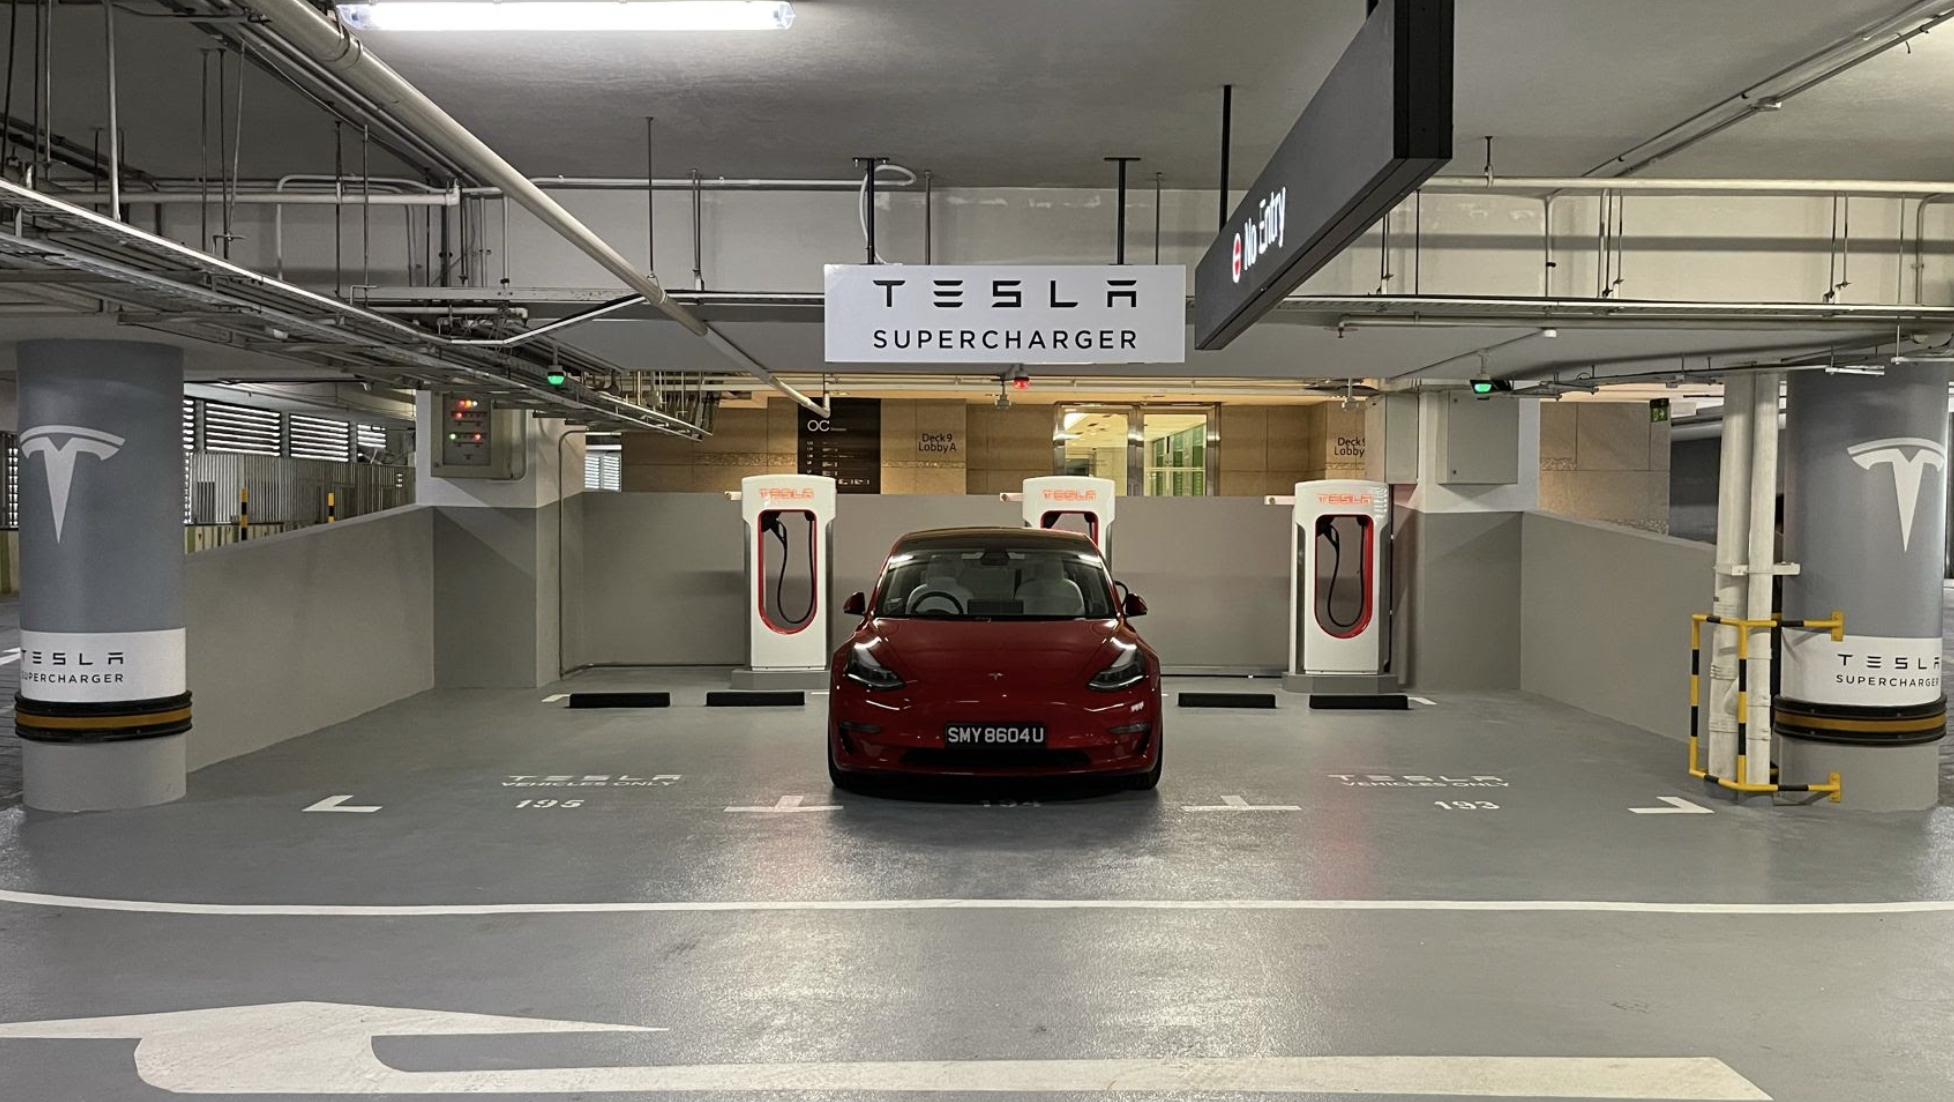 More Tesla supercharger stations are being set up across the country